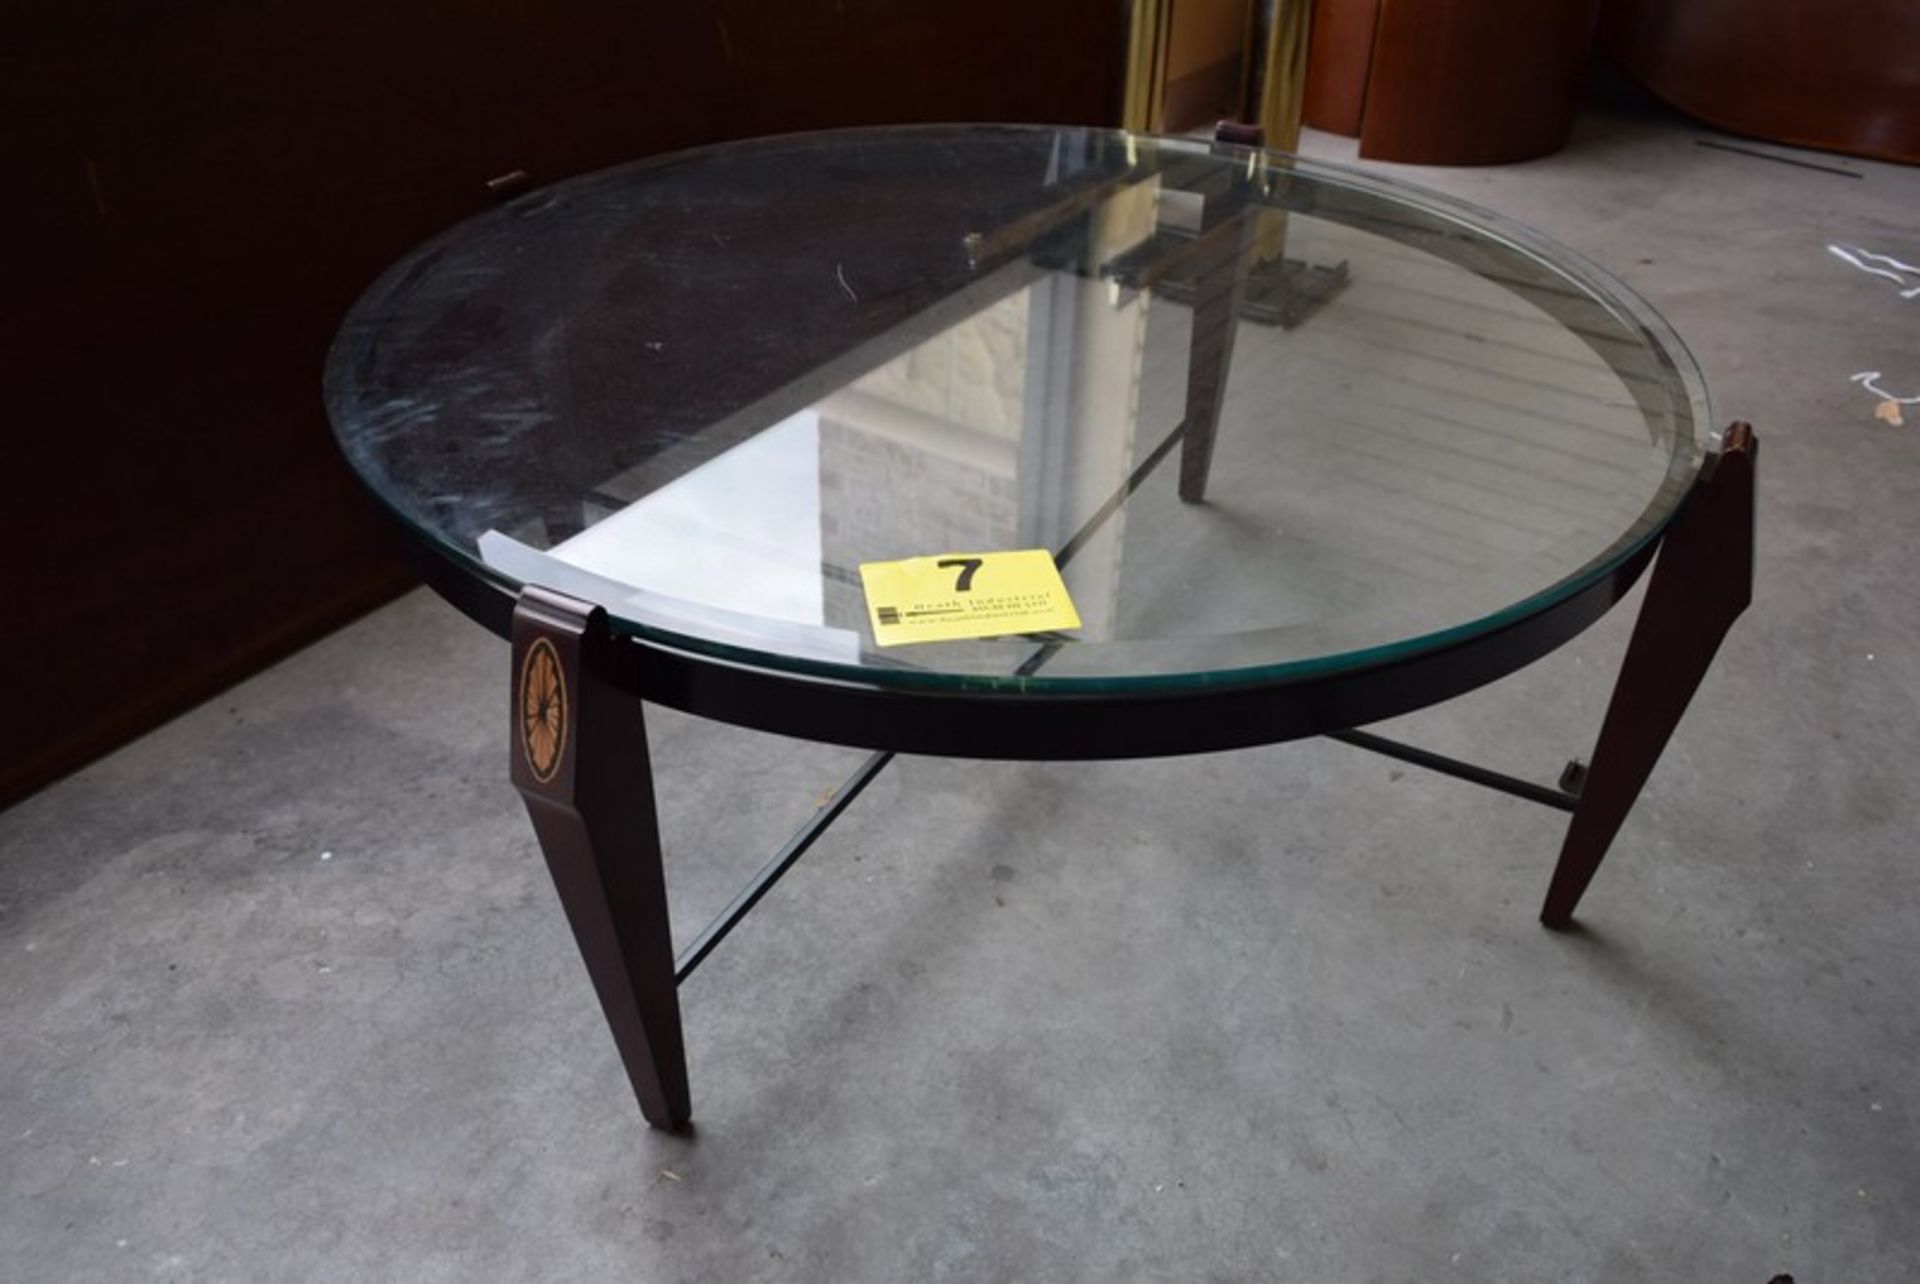 38" DIA. GLASS COFFEE TABLE - Image 2 of 2